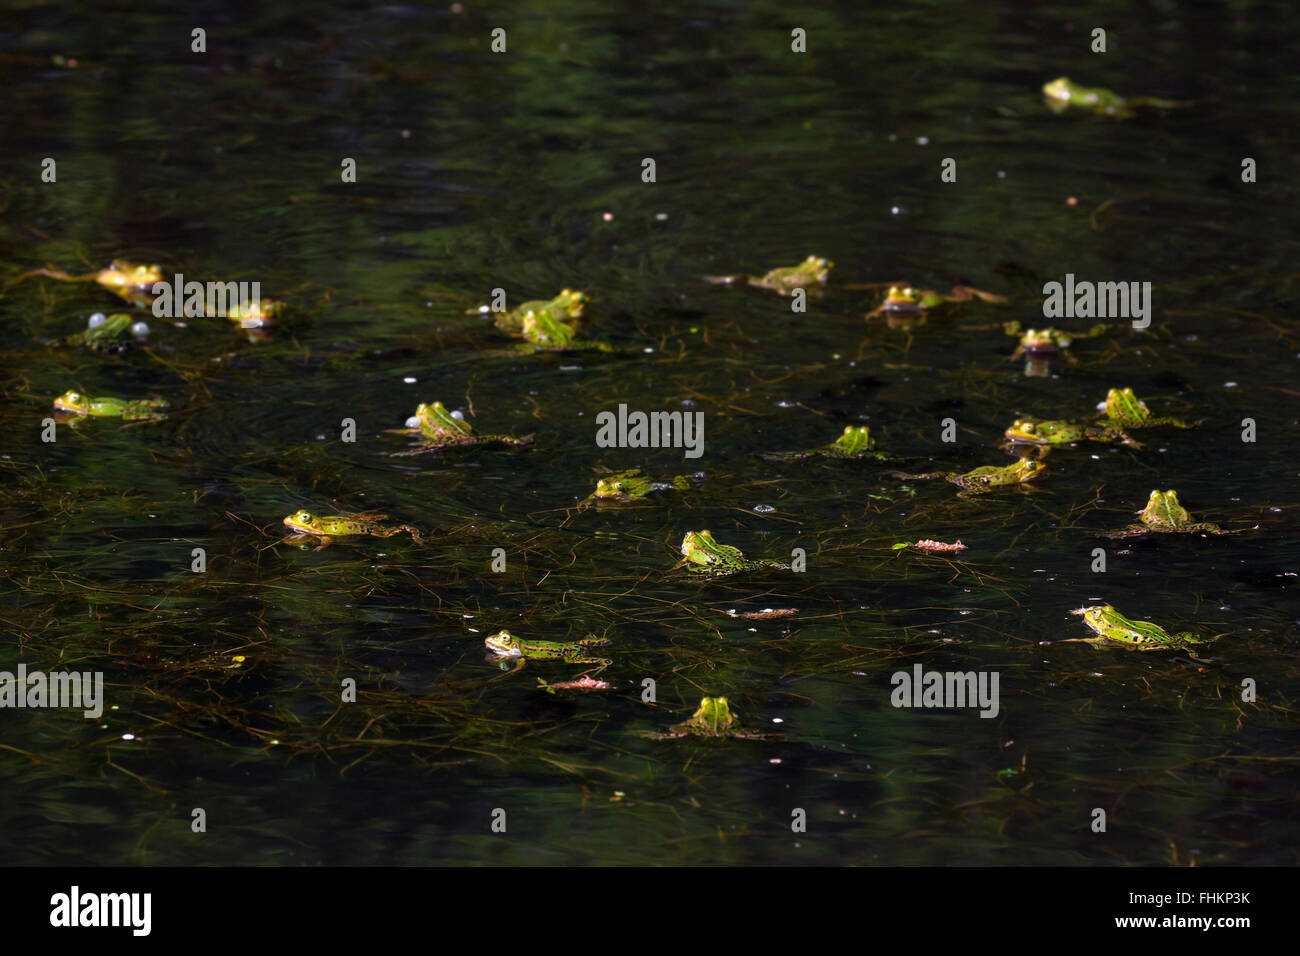 Edible frogs / green frog (Pelophylax kl. esculentus / Rana kl. esculenta) group floating in pond in the mating season Stock Photo